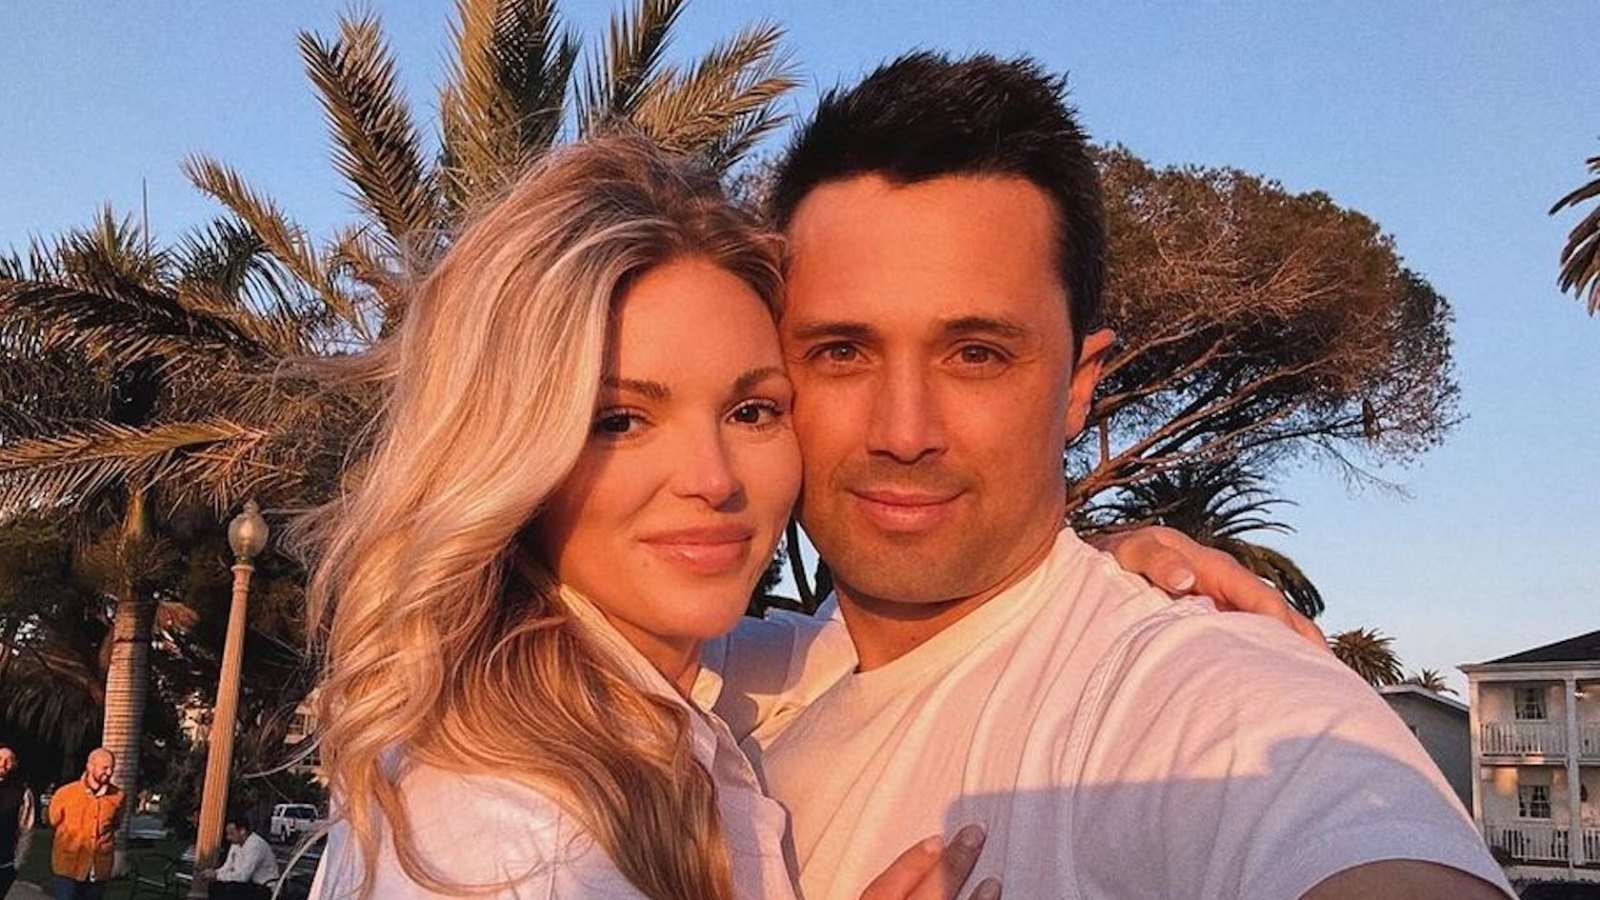 Stephen Colletti Teases Wedding Plans With Fiancee Alex Weaver feature